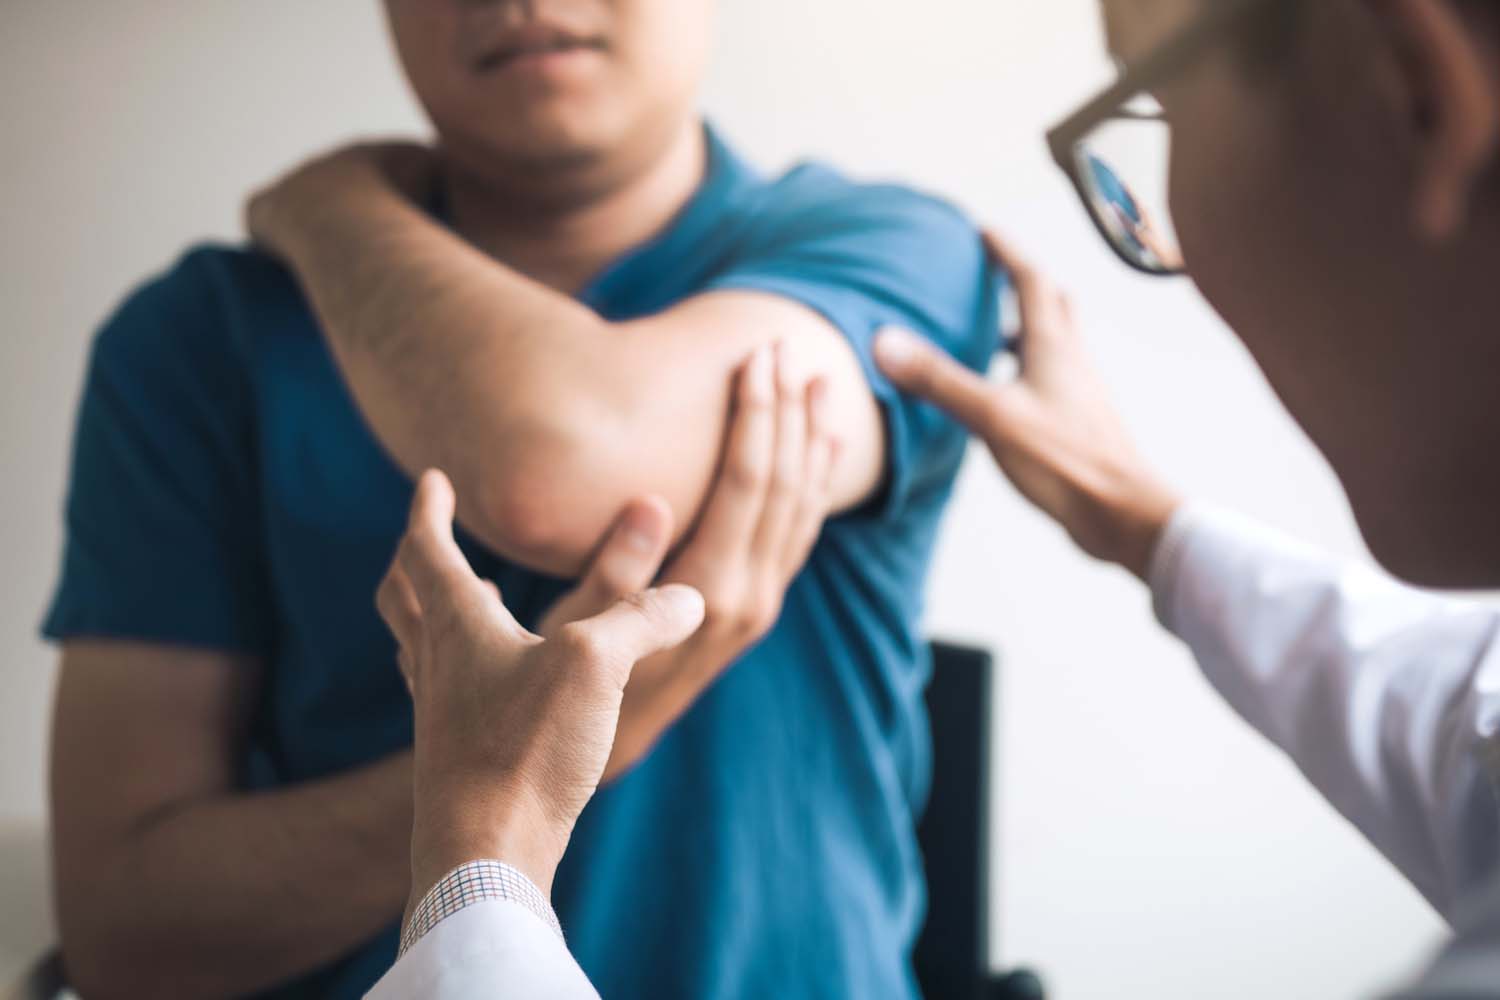 A doctor looking at a patient's elbow and shoulder